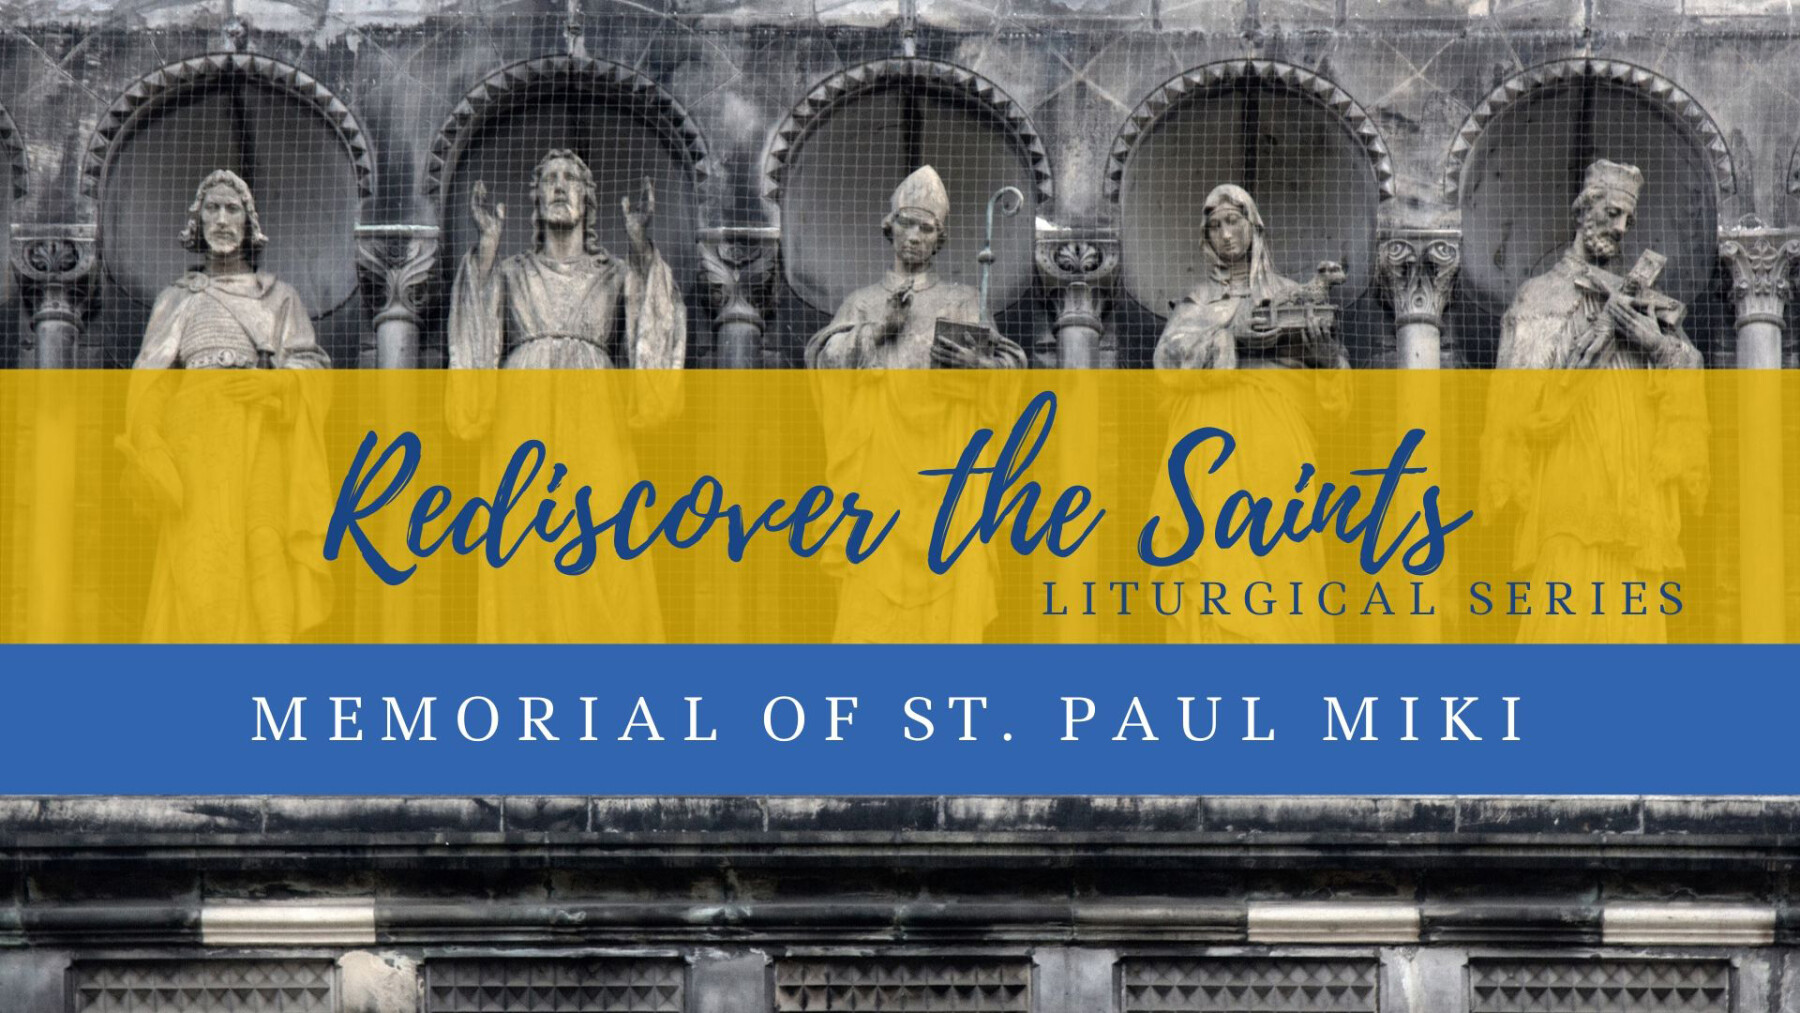 Rediscover the Saints Liturgical Series: Memorial of St. Paul Miki